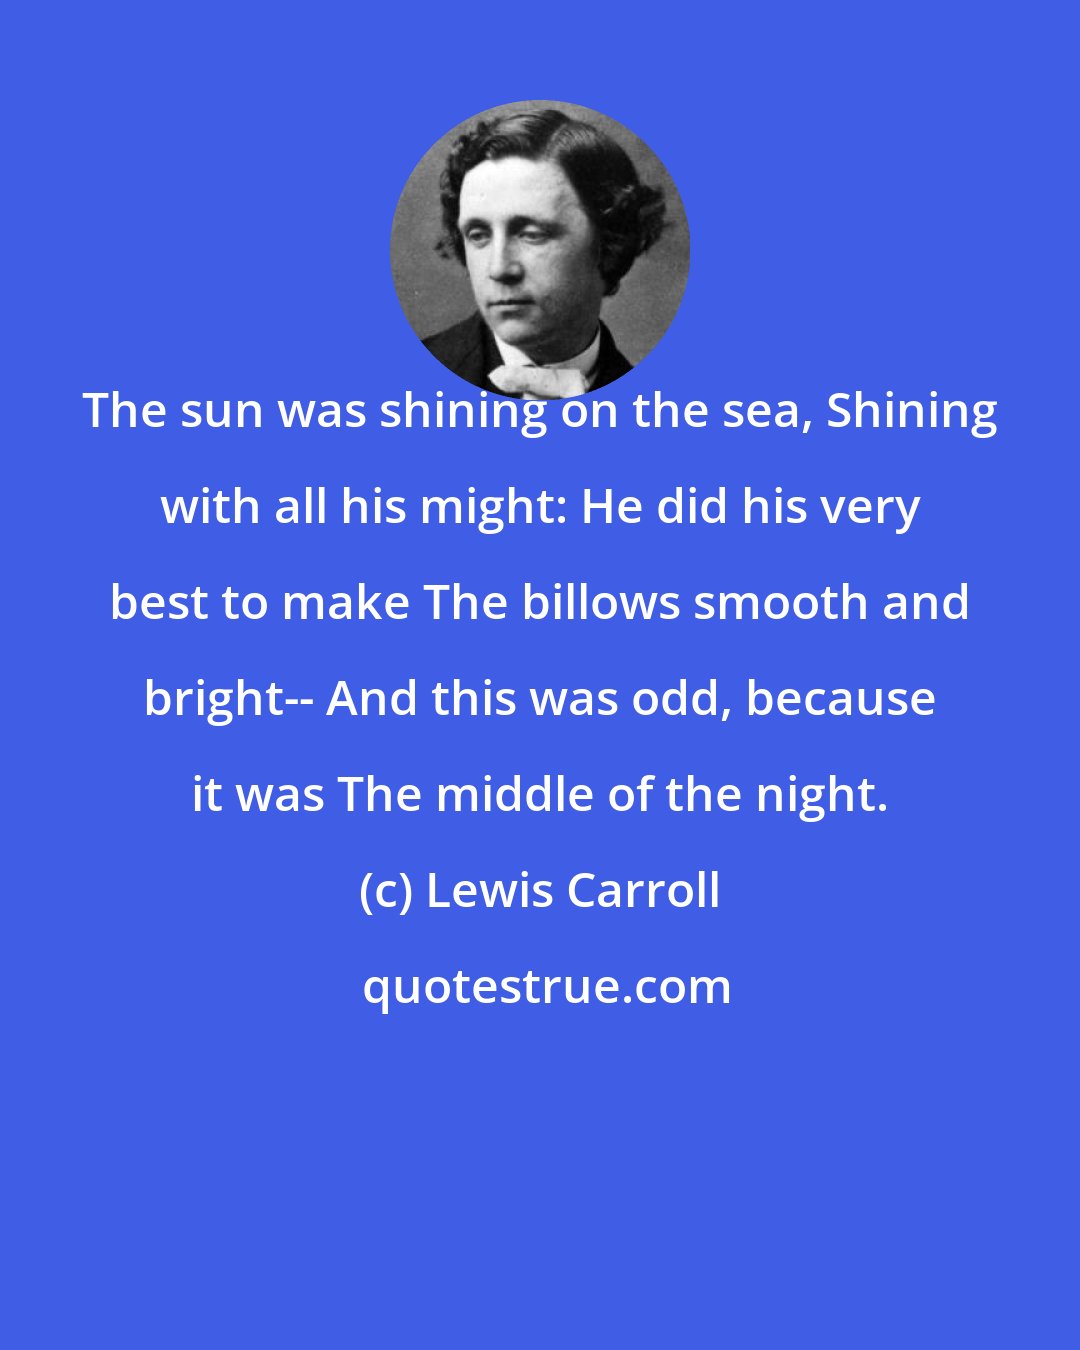 Lewis Carroll: The sun was shining on the sea, Shining with all his might: He did his very best to make The billows smooth and bright-- And this was odd, because it was The middle of the night.